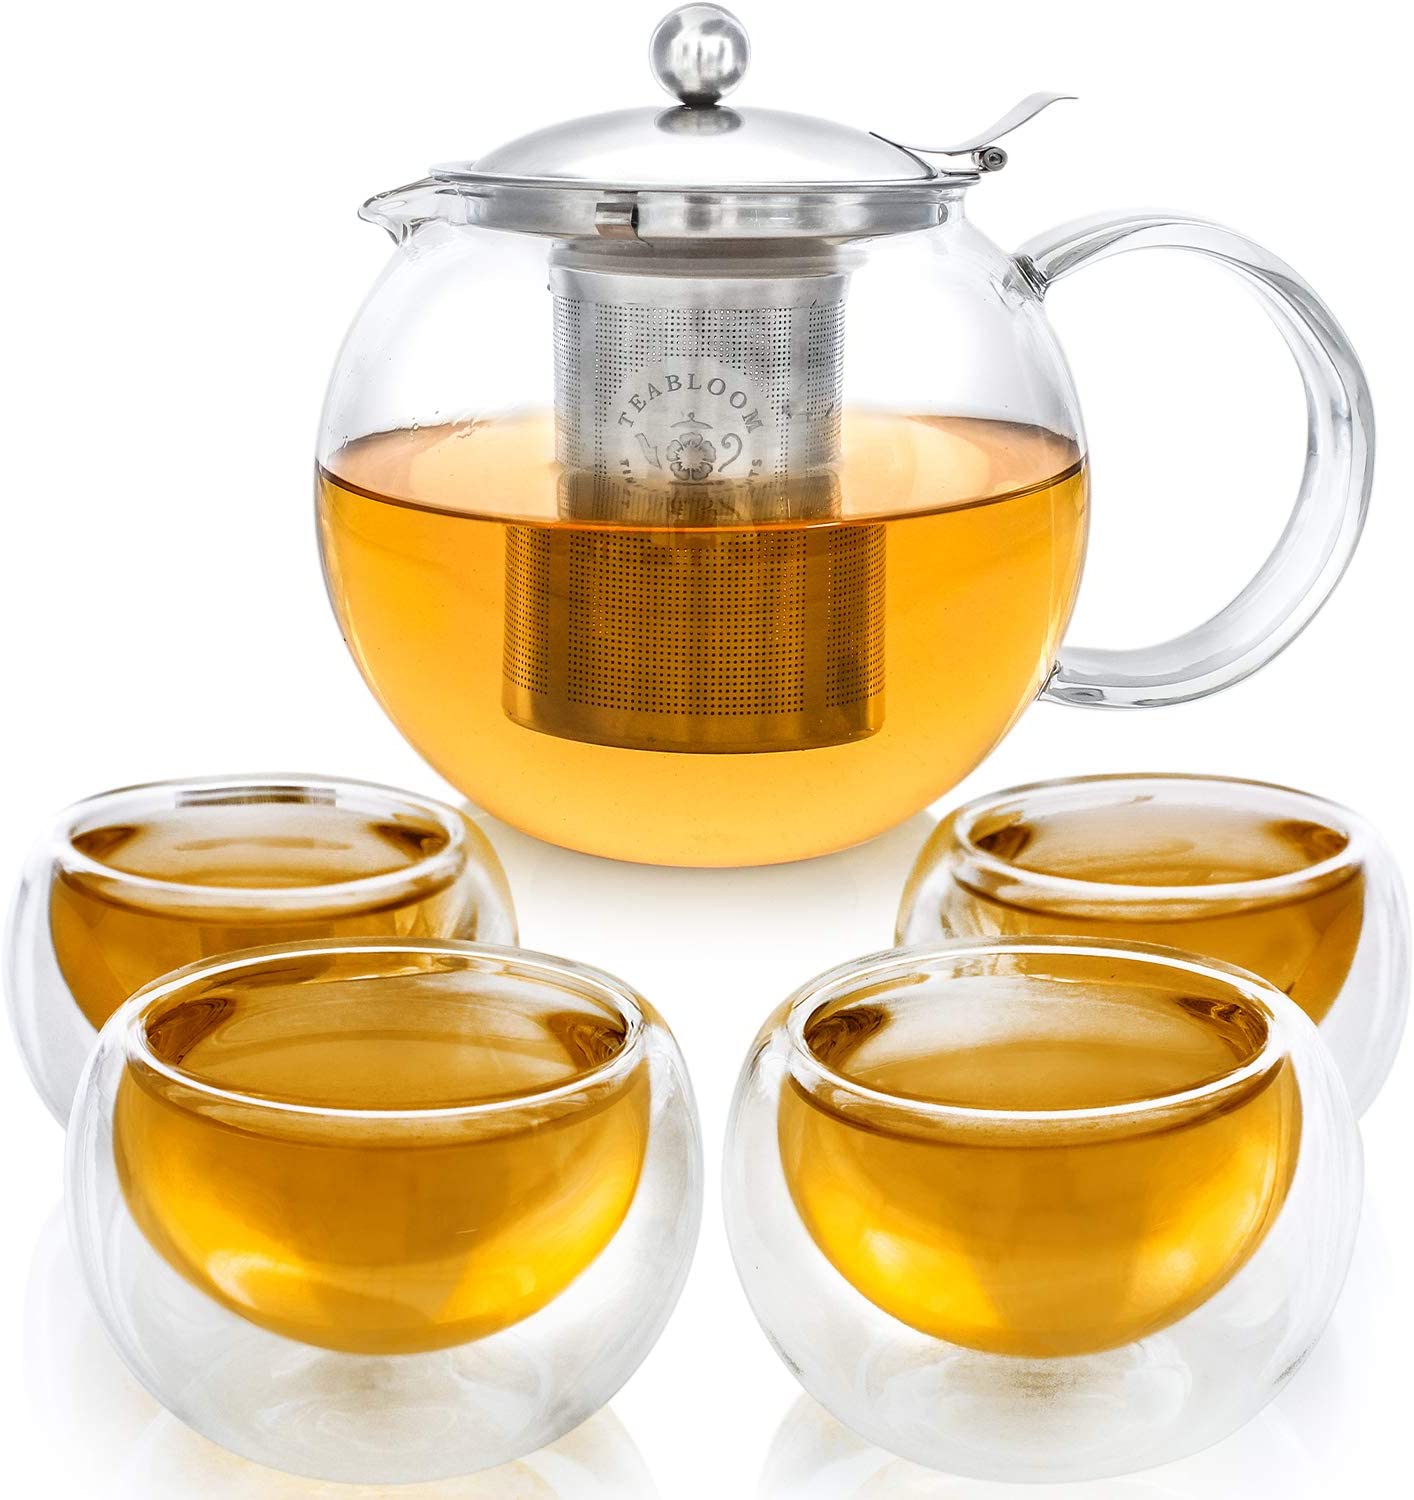 Teabloom Tea Set - Heat Resistant and Lead Free Glass Teapot Kettle (1200ml) with Removable Stainless Steel Filter for Loose Tea - Contains 4 Double Wall Insulated Glass Cups (150ml)